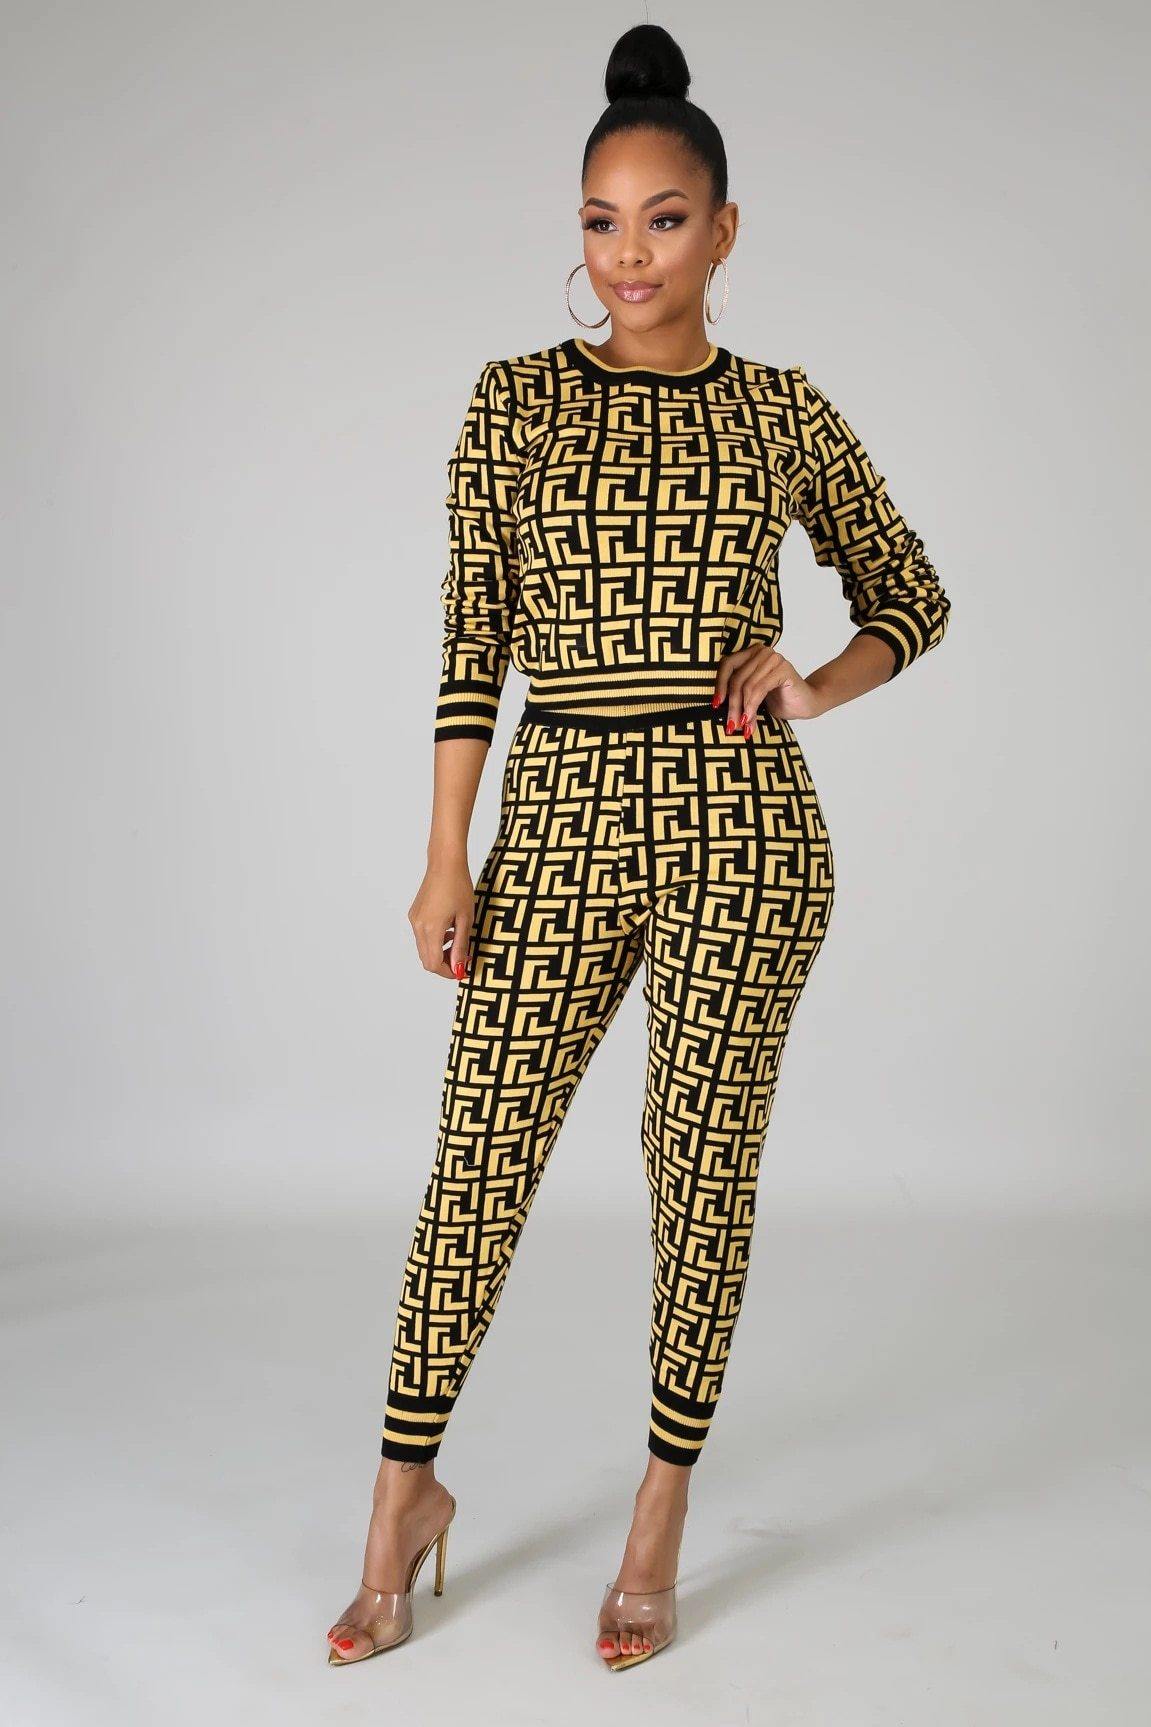 Round Neck pattern sweat suit - For you and all